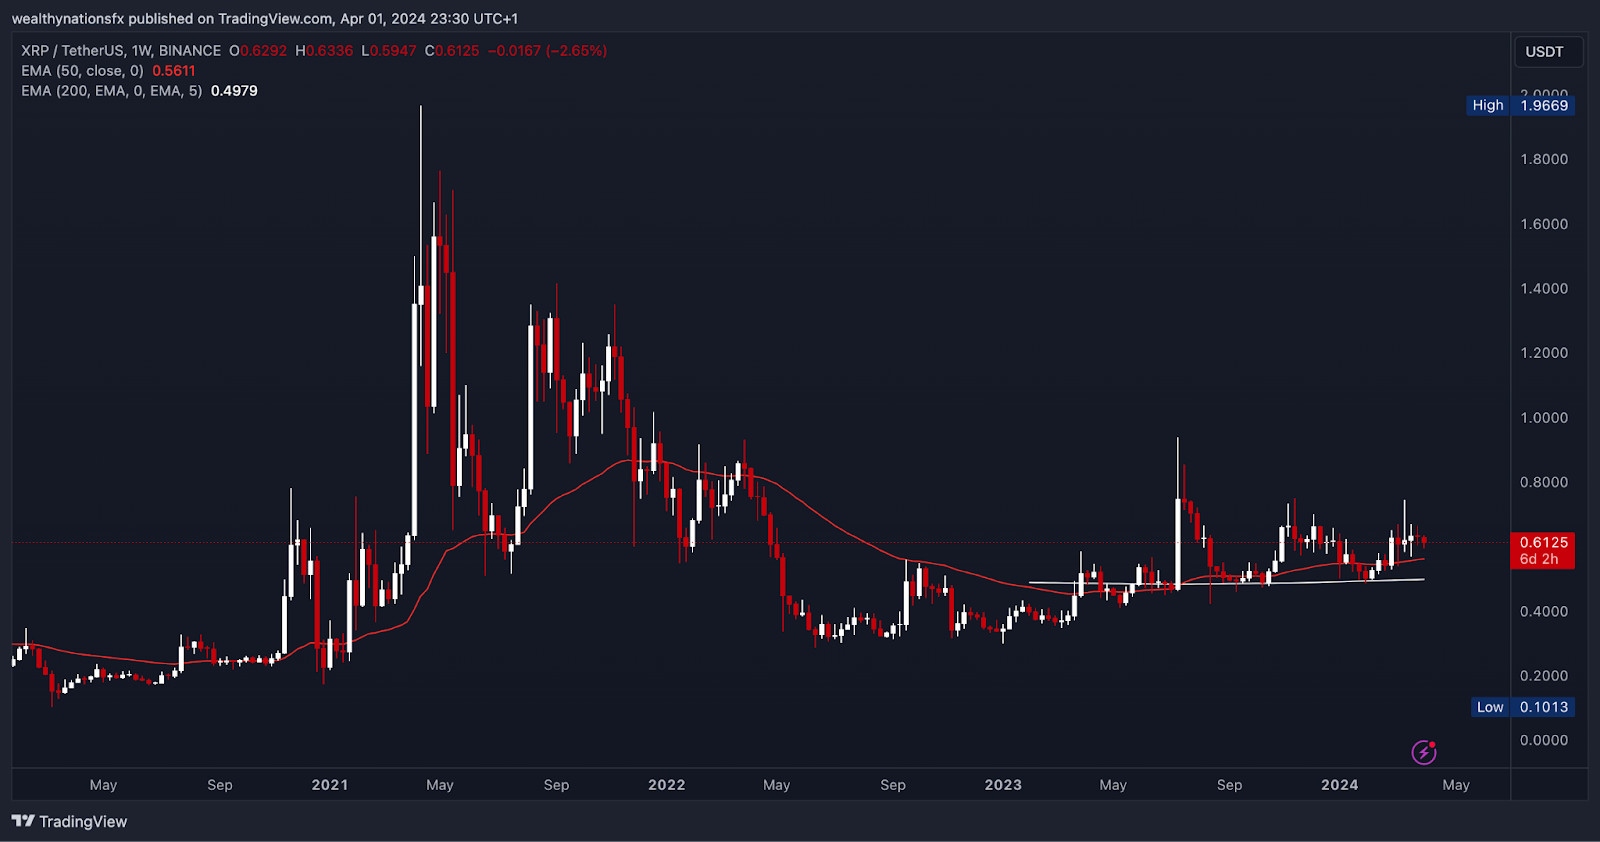 XRP to US Dollar Price Chart showing historical price movements and trends.